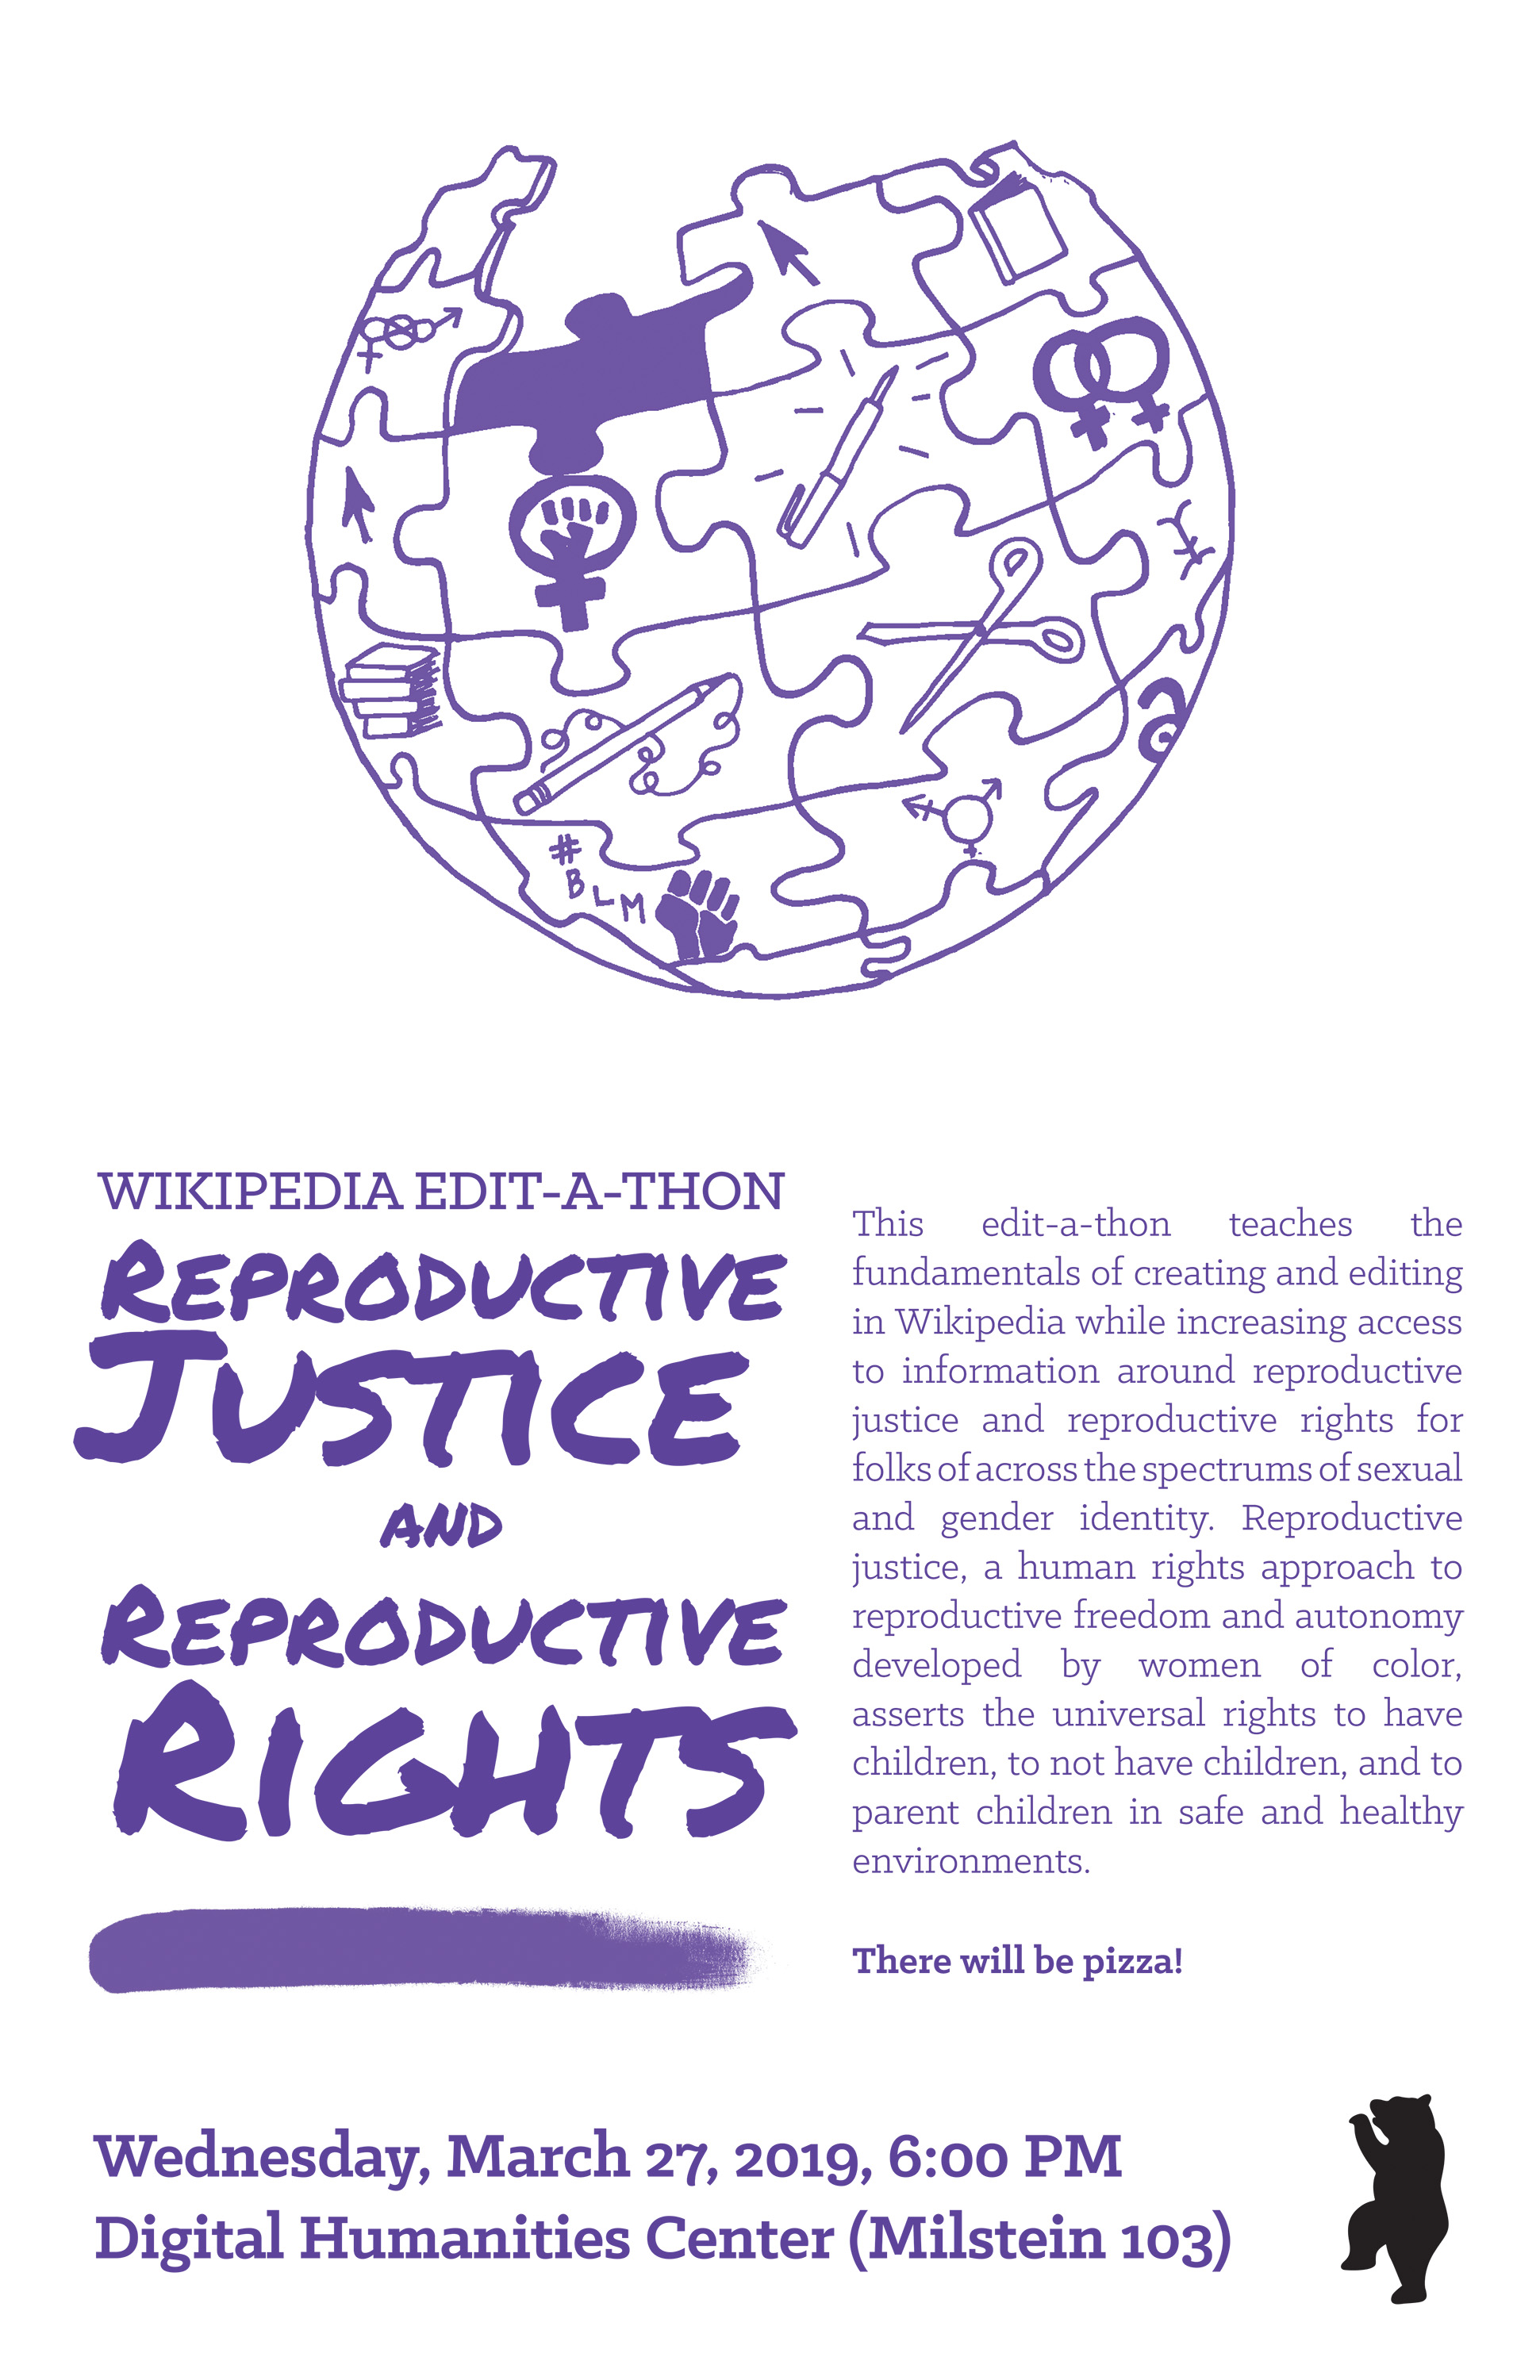 Wikipedia logo redrawn so there are feminist symbols on the puzzle pieces. Illustration by Suze Myers '16